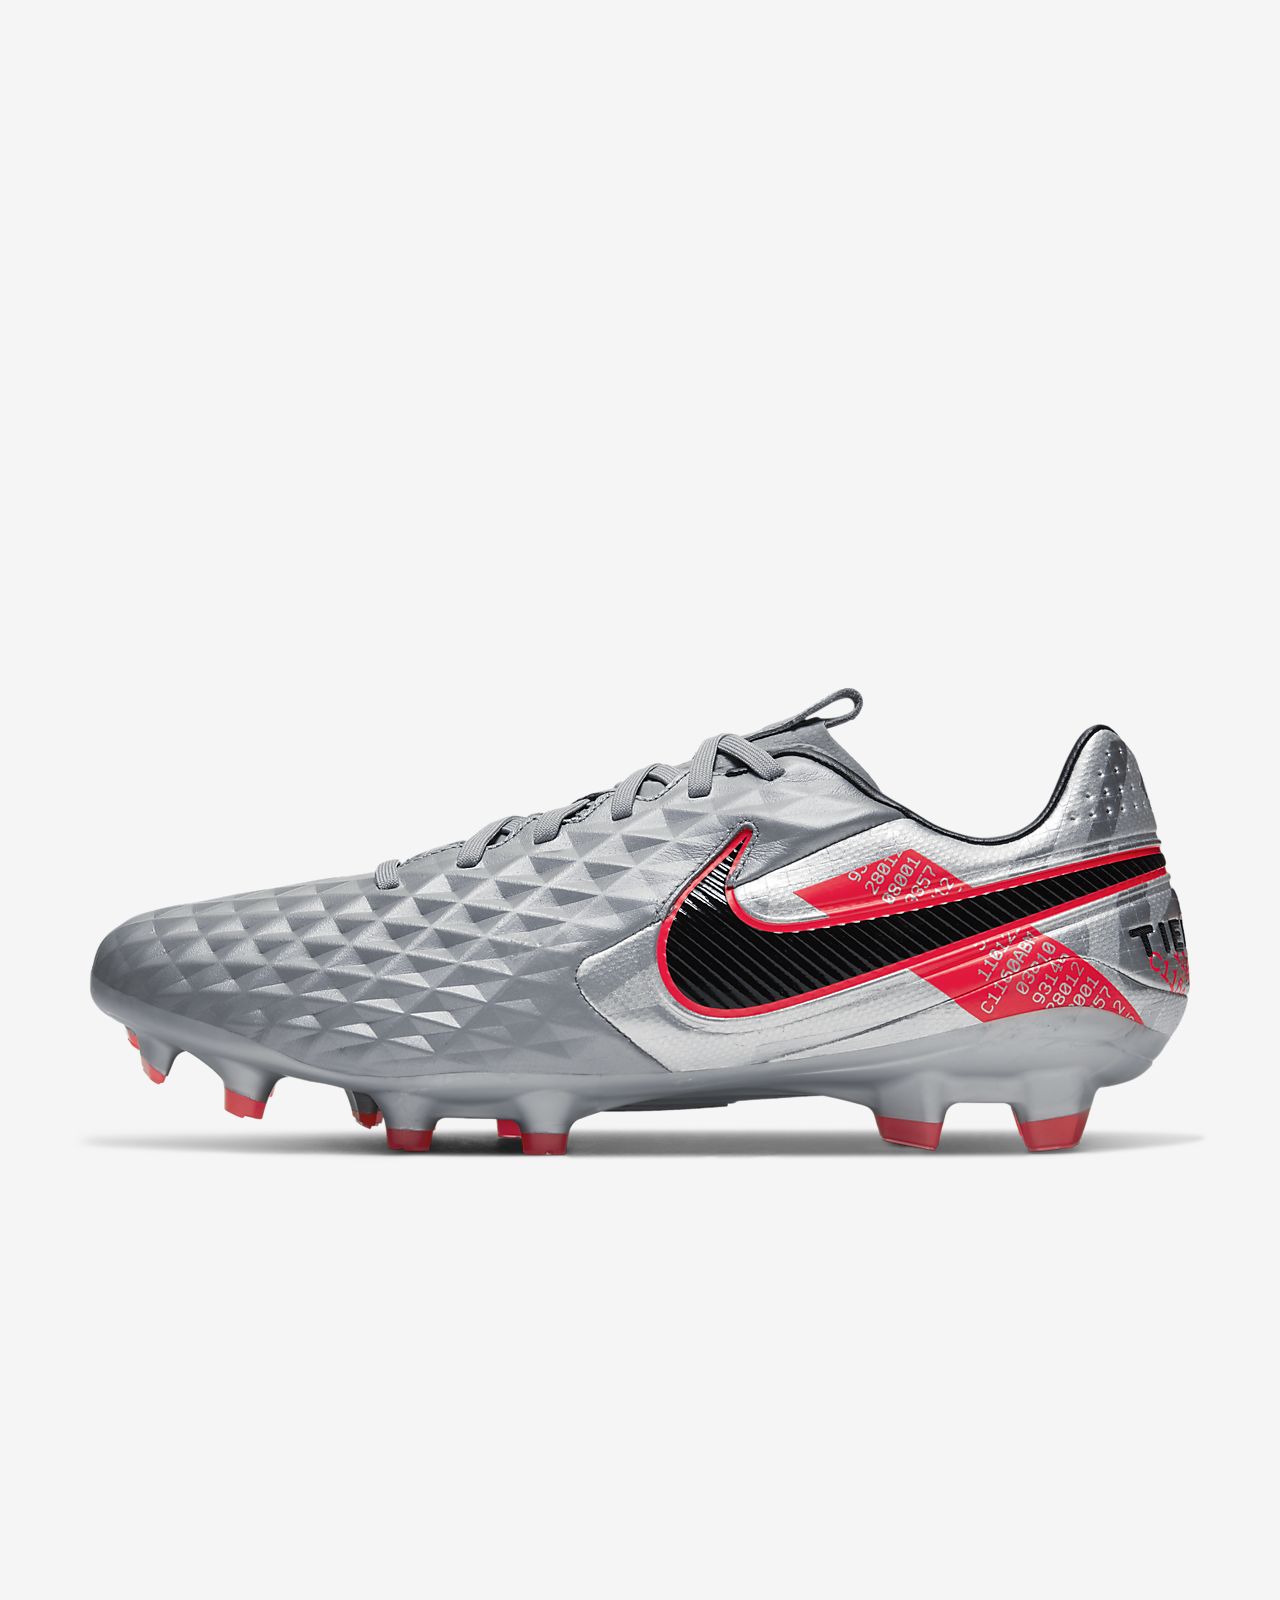 Nike Tiempo Legend 8 Review from Houston Dash Youth.